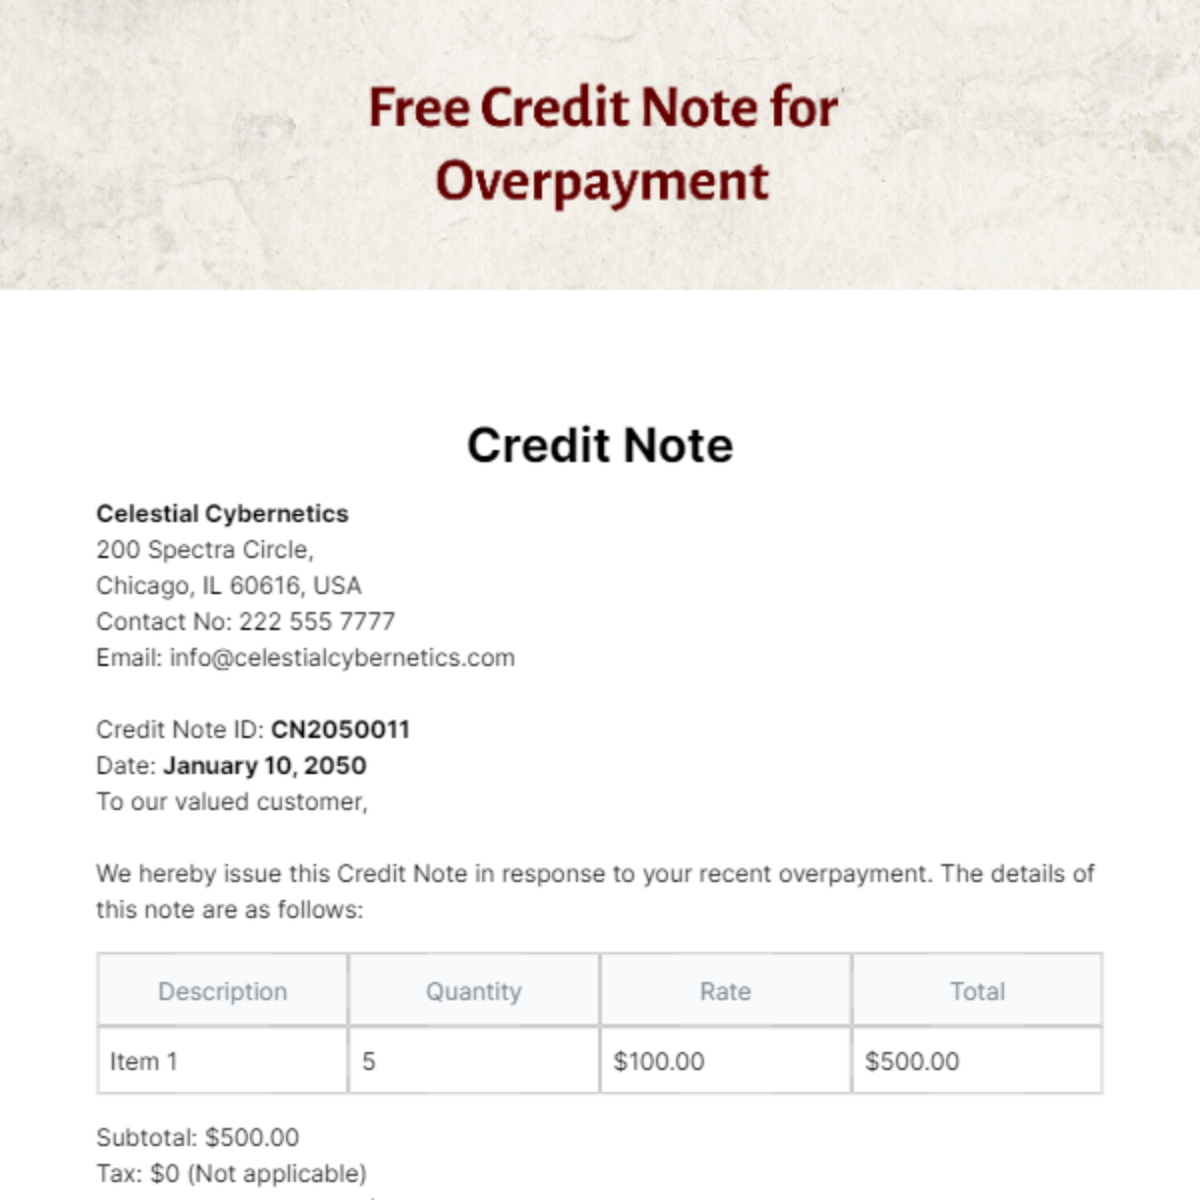 Free Credit Note for Overpayment Template